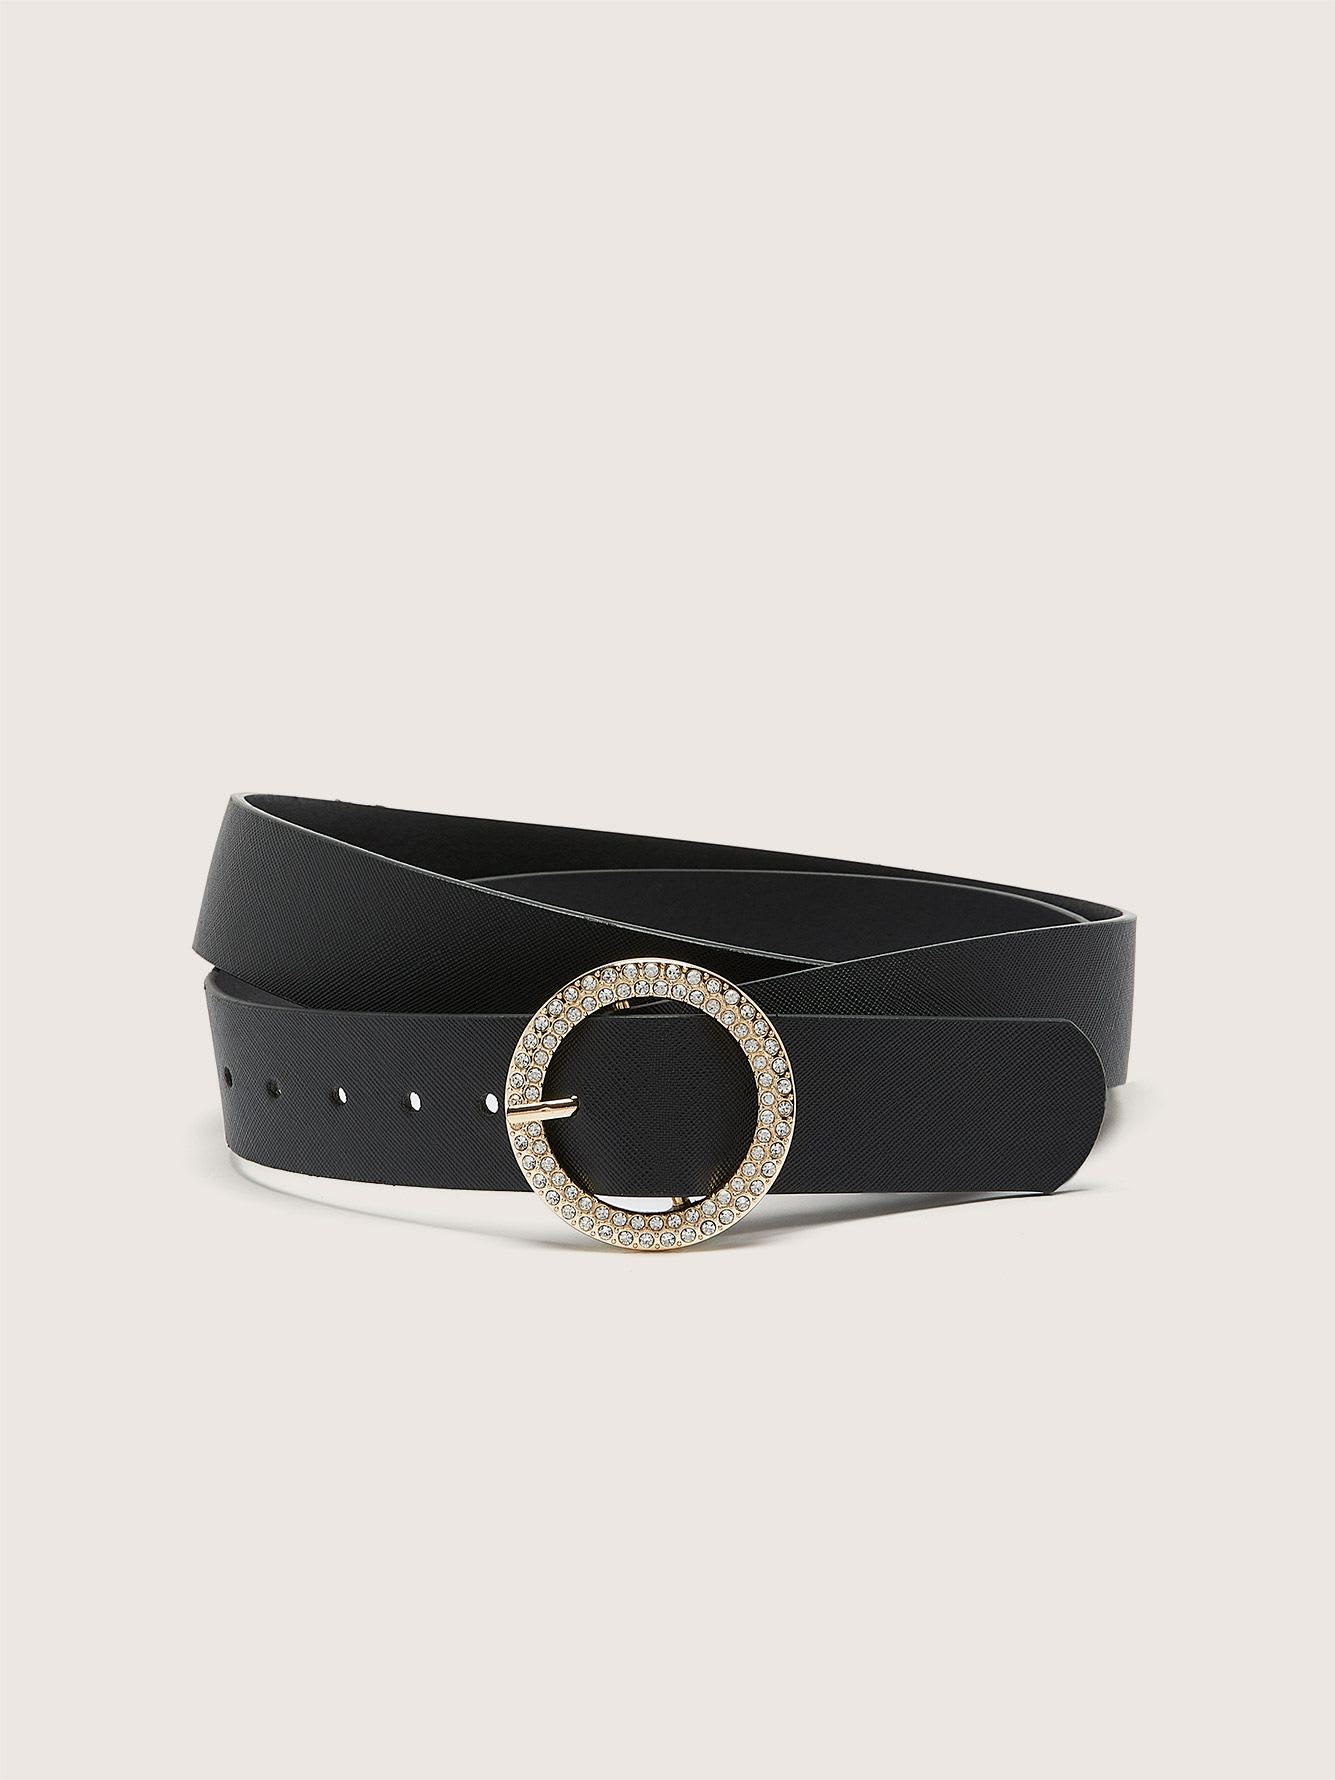 Fancy Round Buckled Belt with Clear Stones | Penningtons